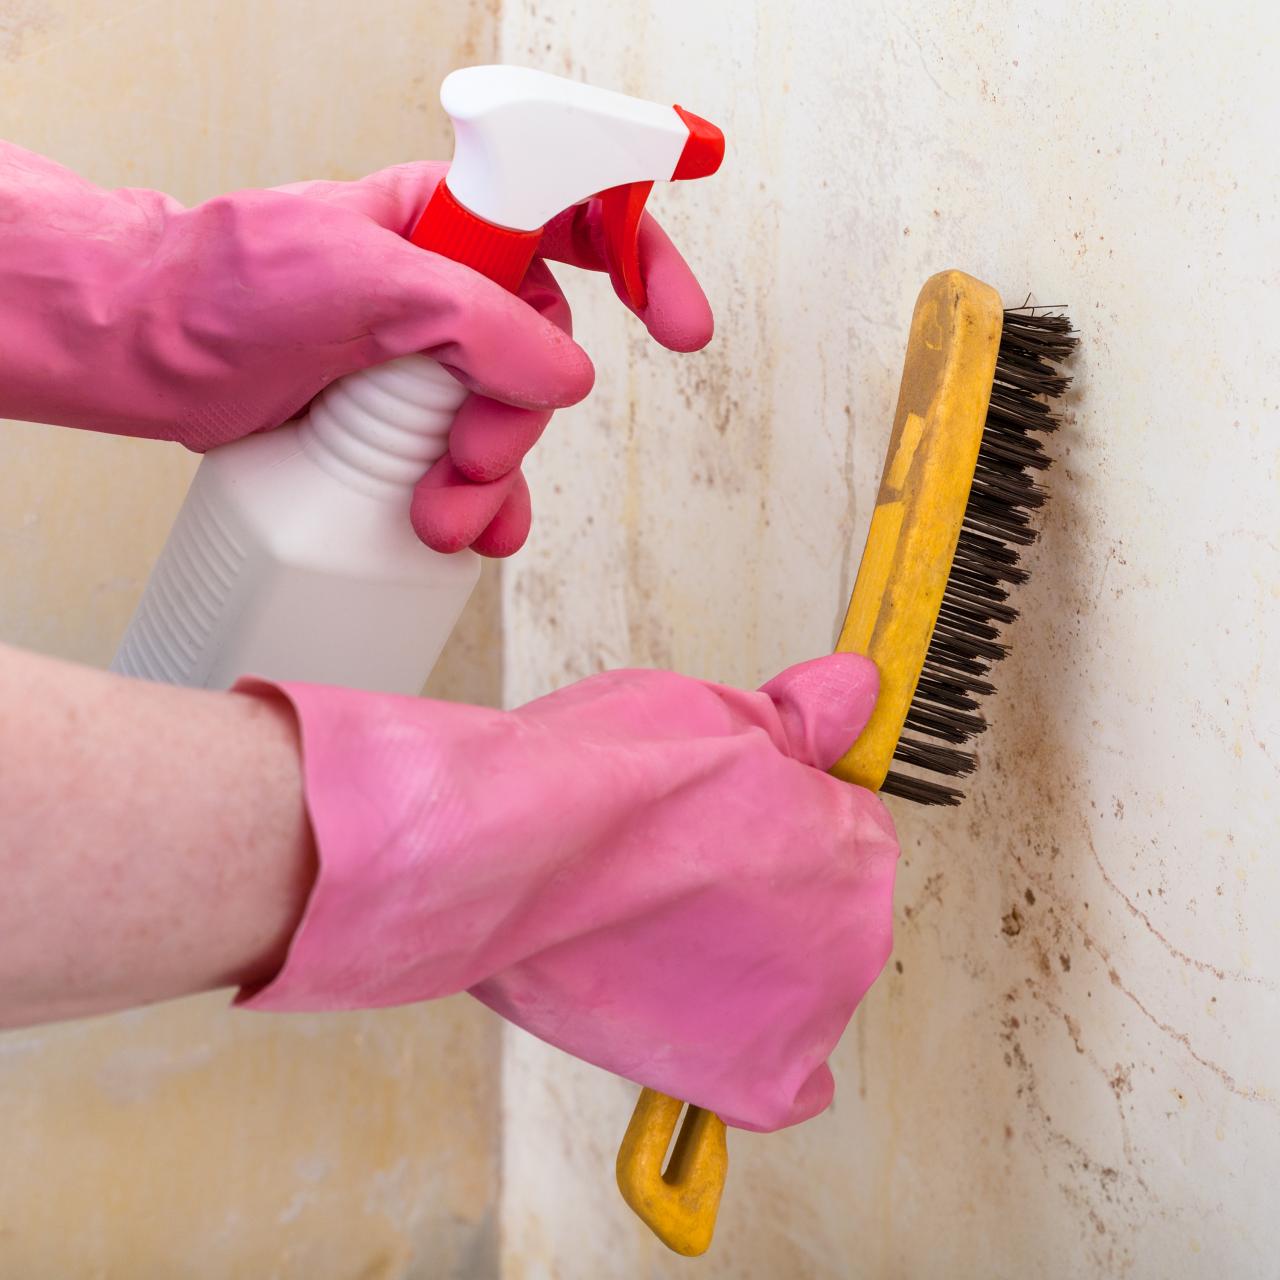 An image of two hands in pink rubber gloves holding a spray bottle and brush against a wall that has mold on it